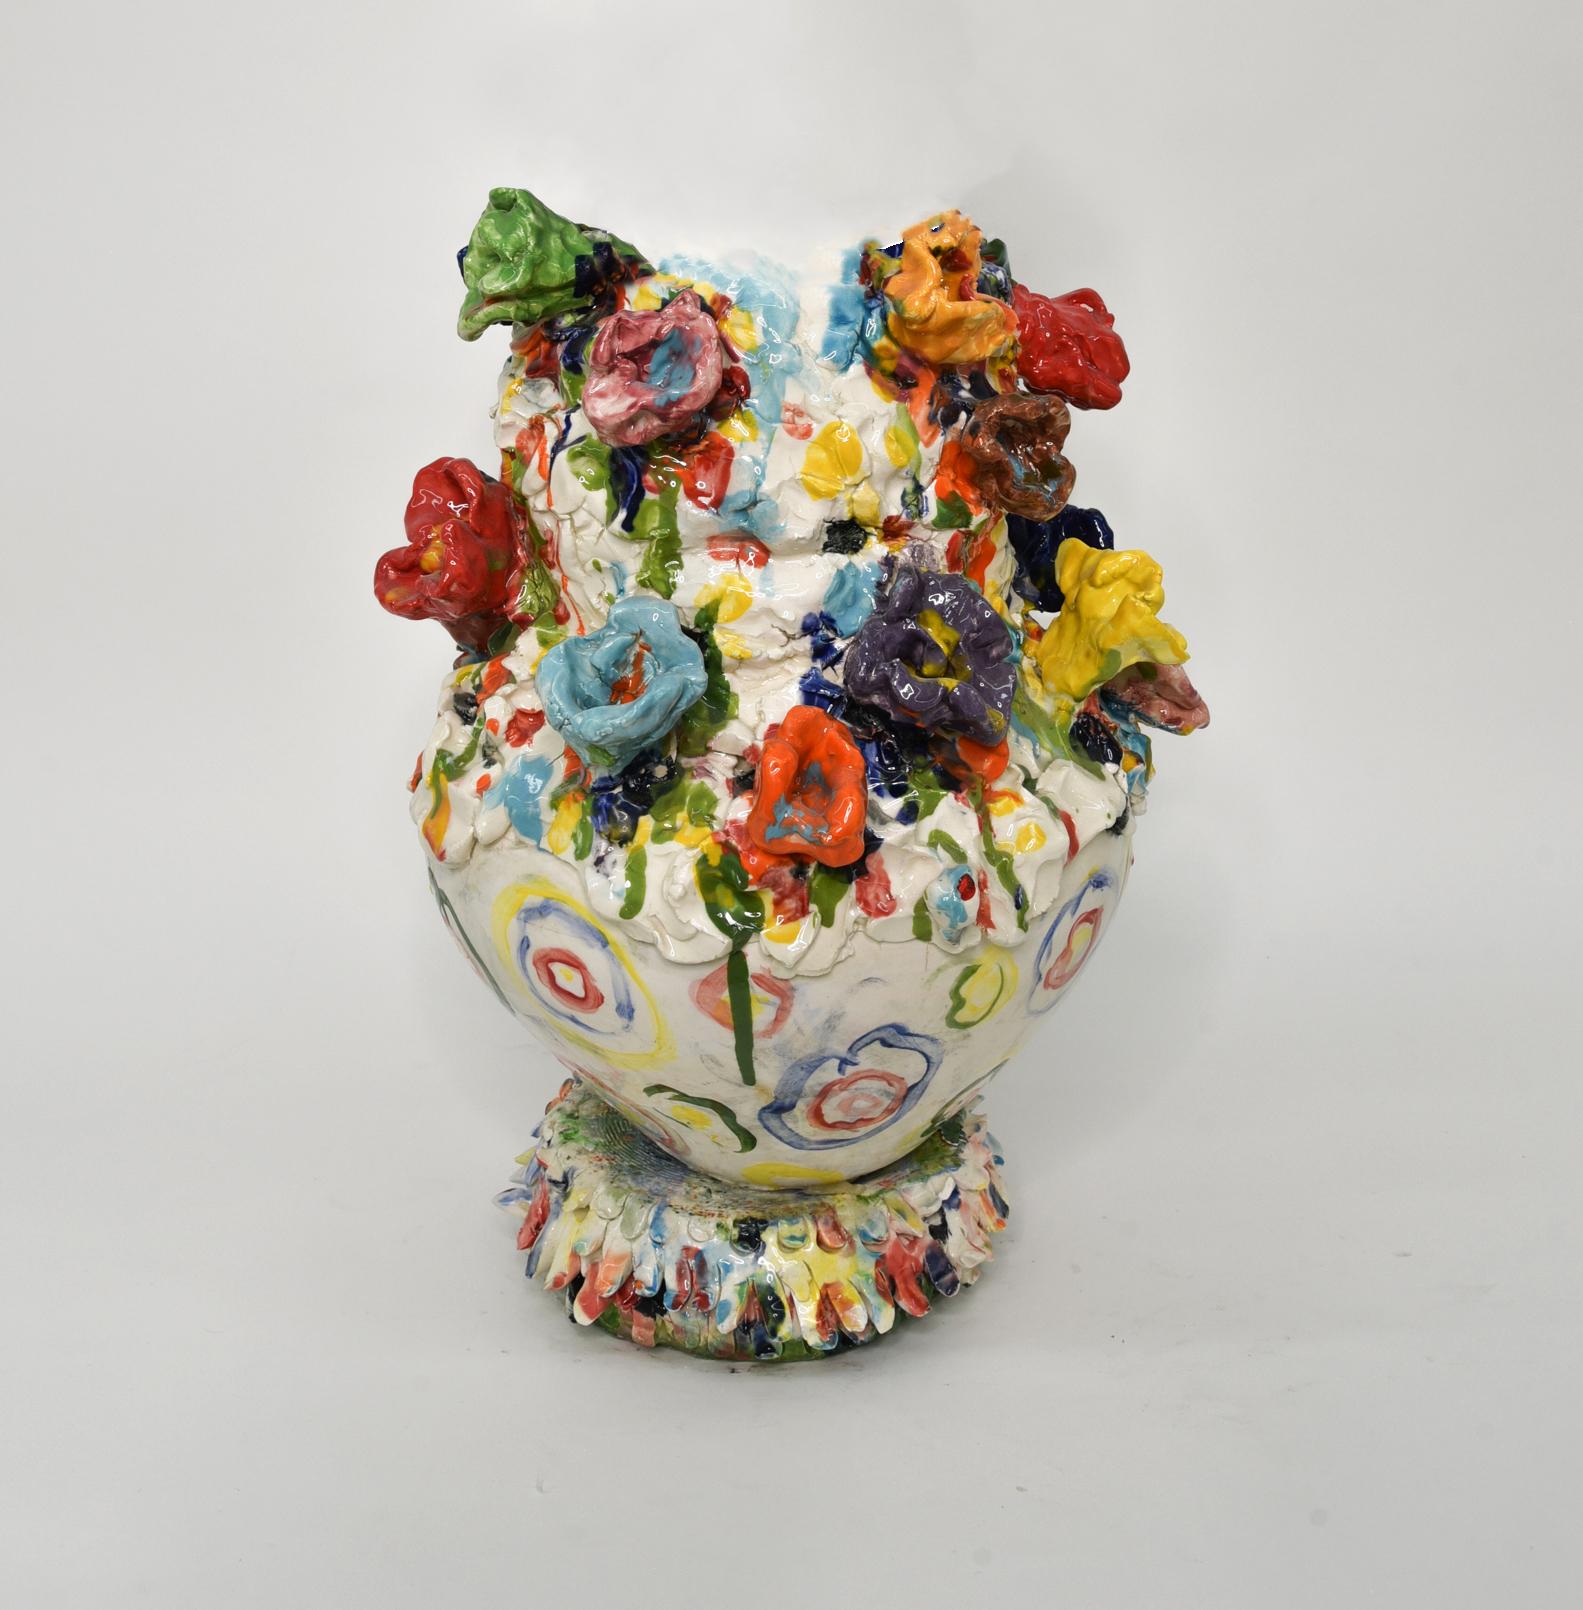 Colored flowers. Glazed ceramic sculpture - Sculpture by Charo Oquet